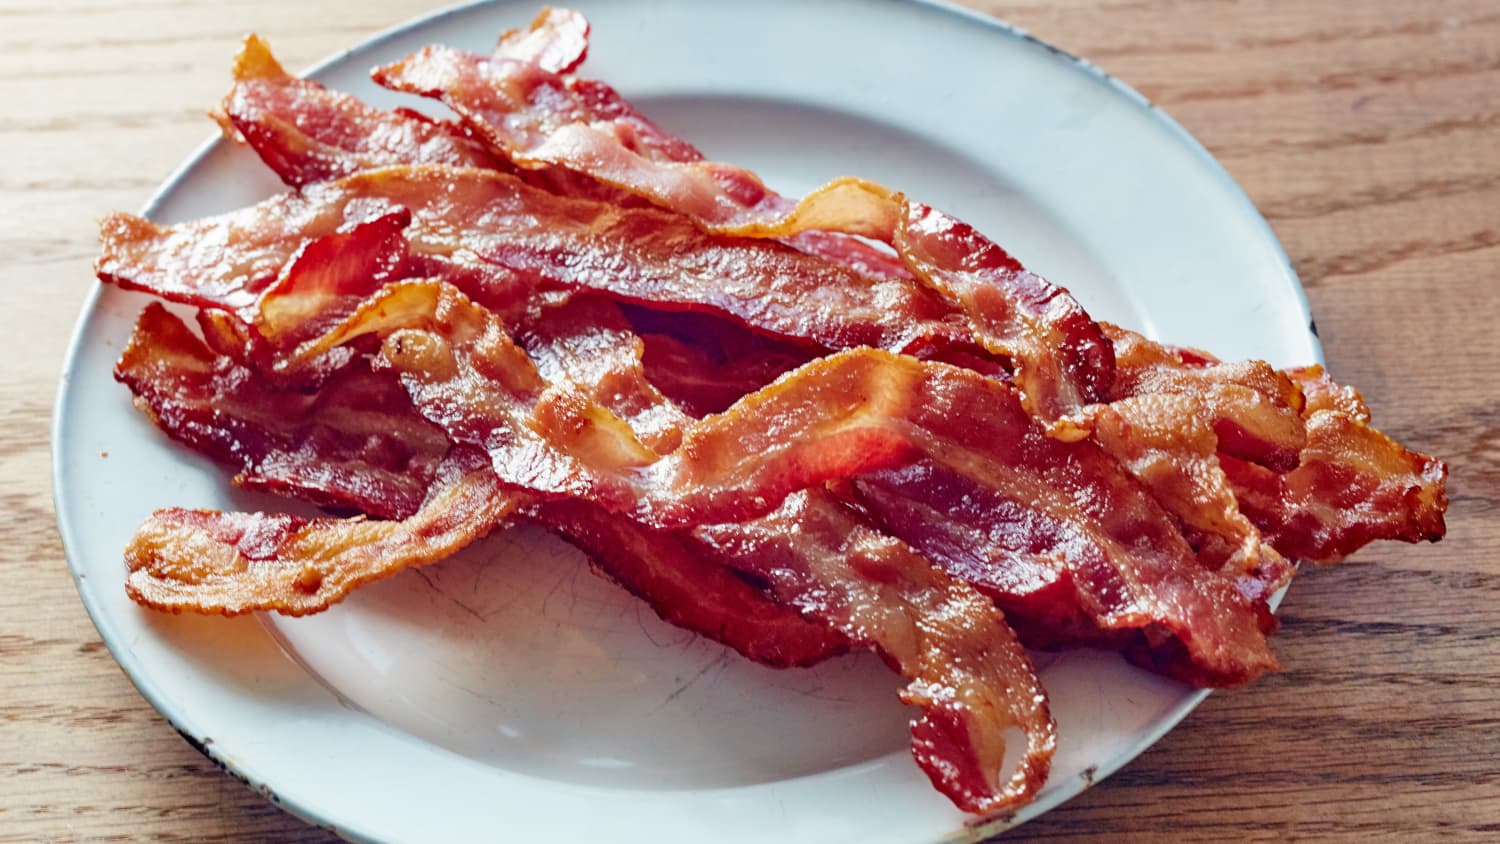 How to Cook Bacon in the Oven - 40 Aprons